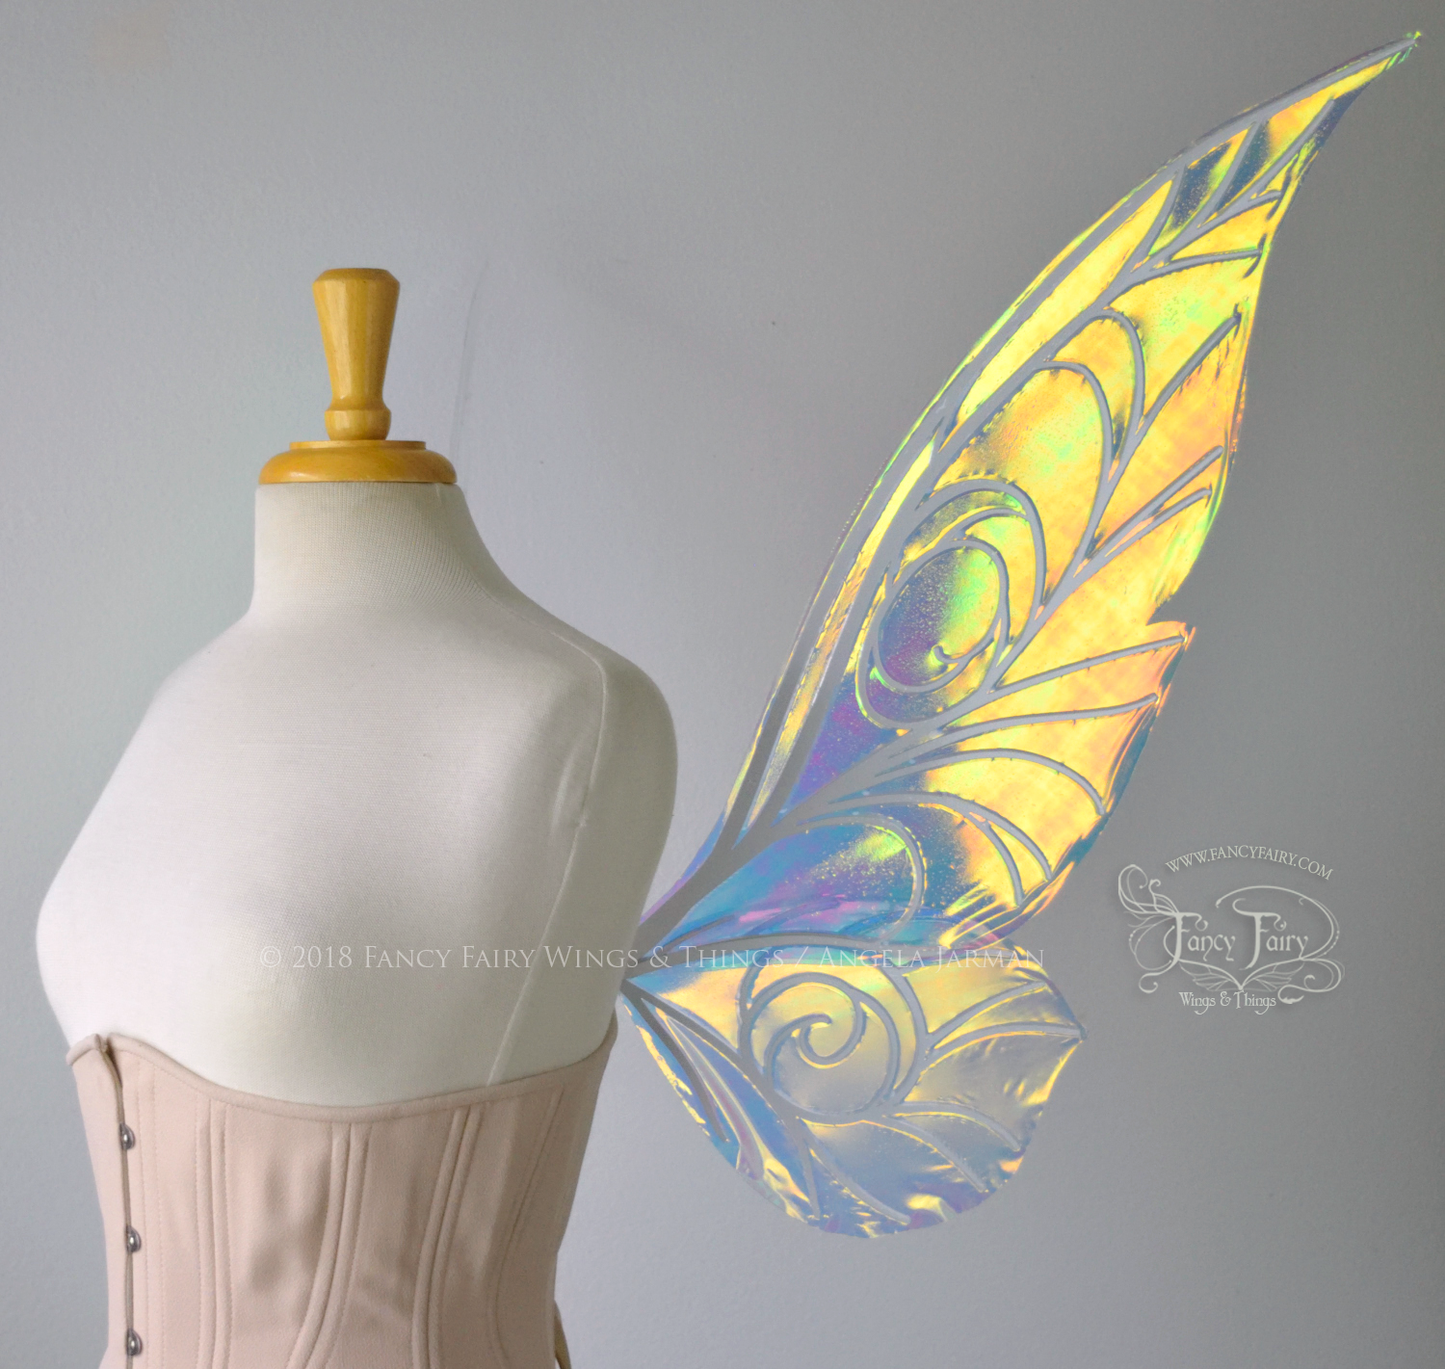 Right side view of transparent green/yellow/orange iridescent Tinker Bell inspired fairy wings with swirly white veins, displayed on a dress form